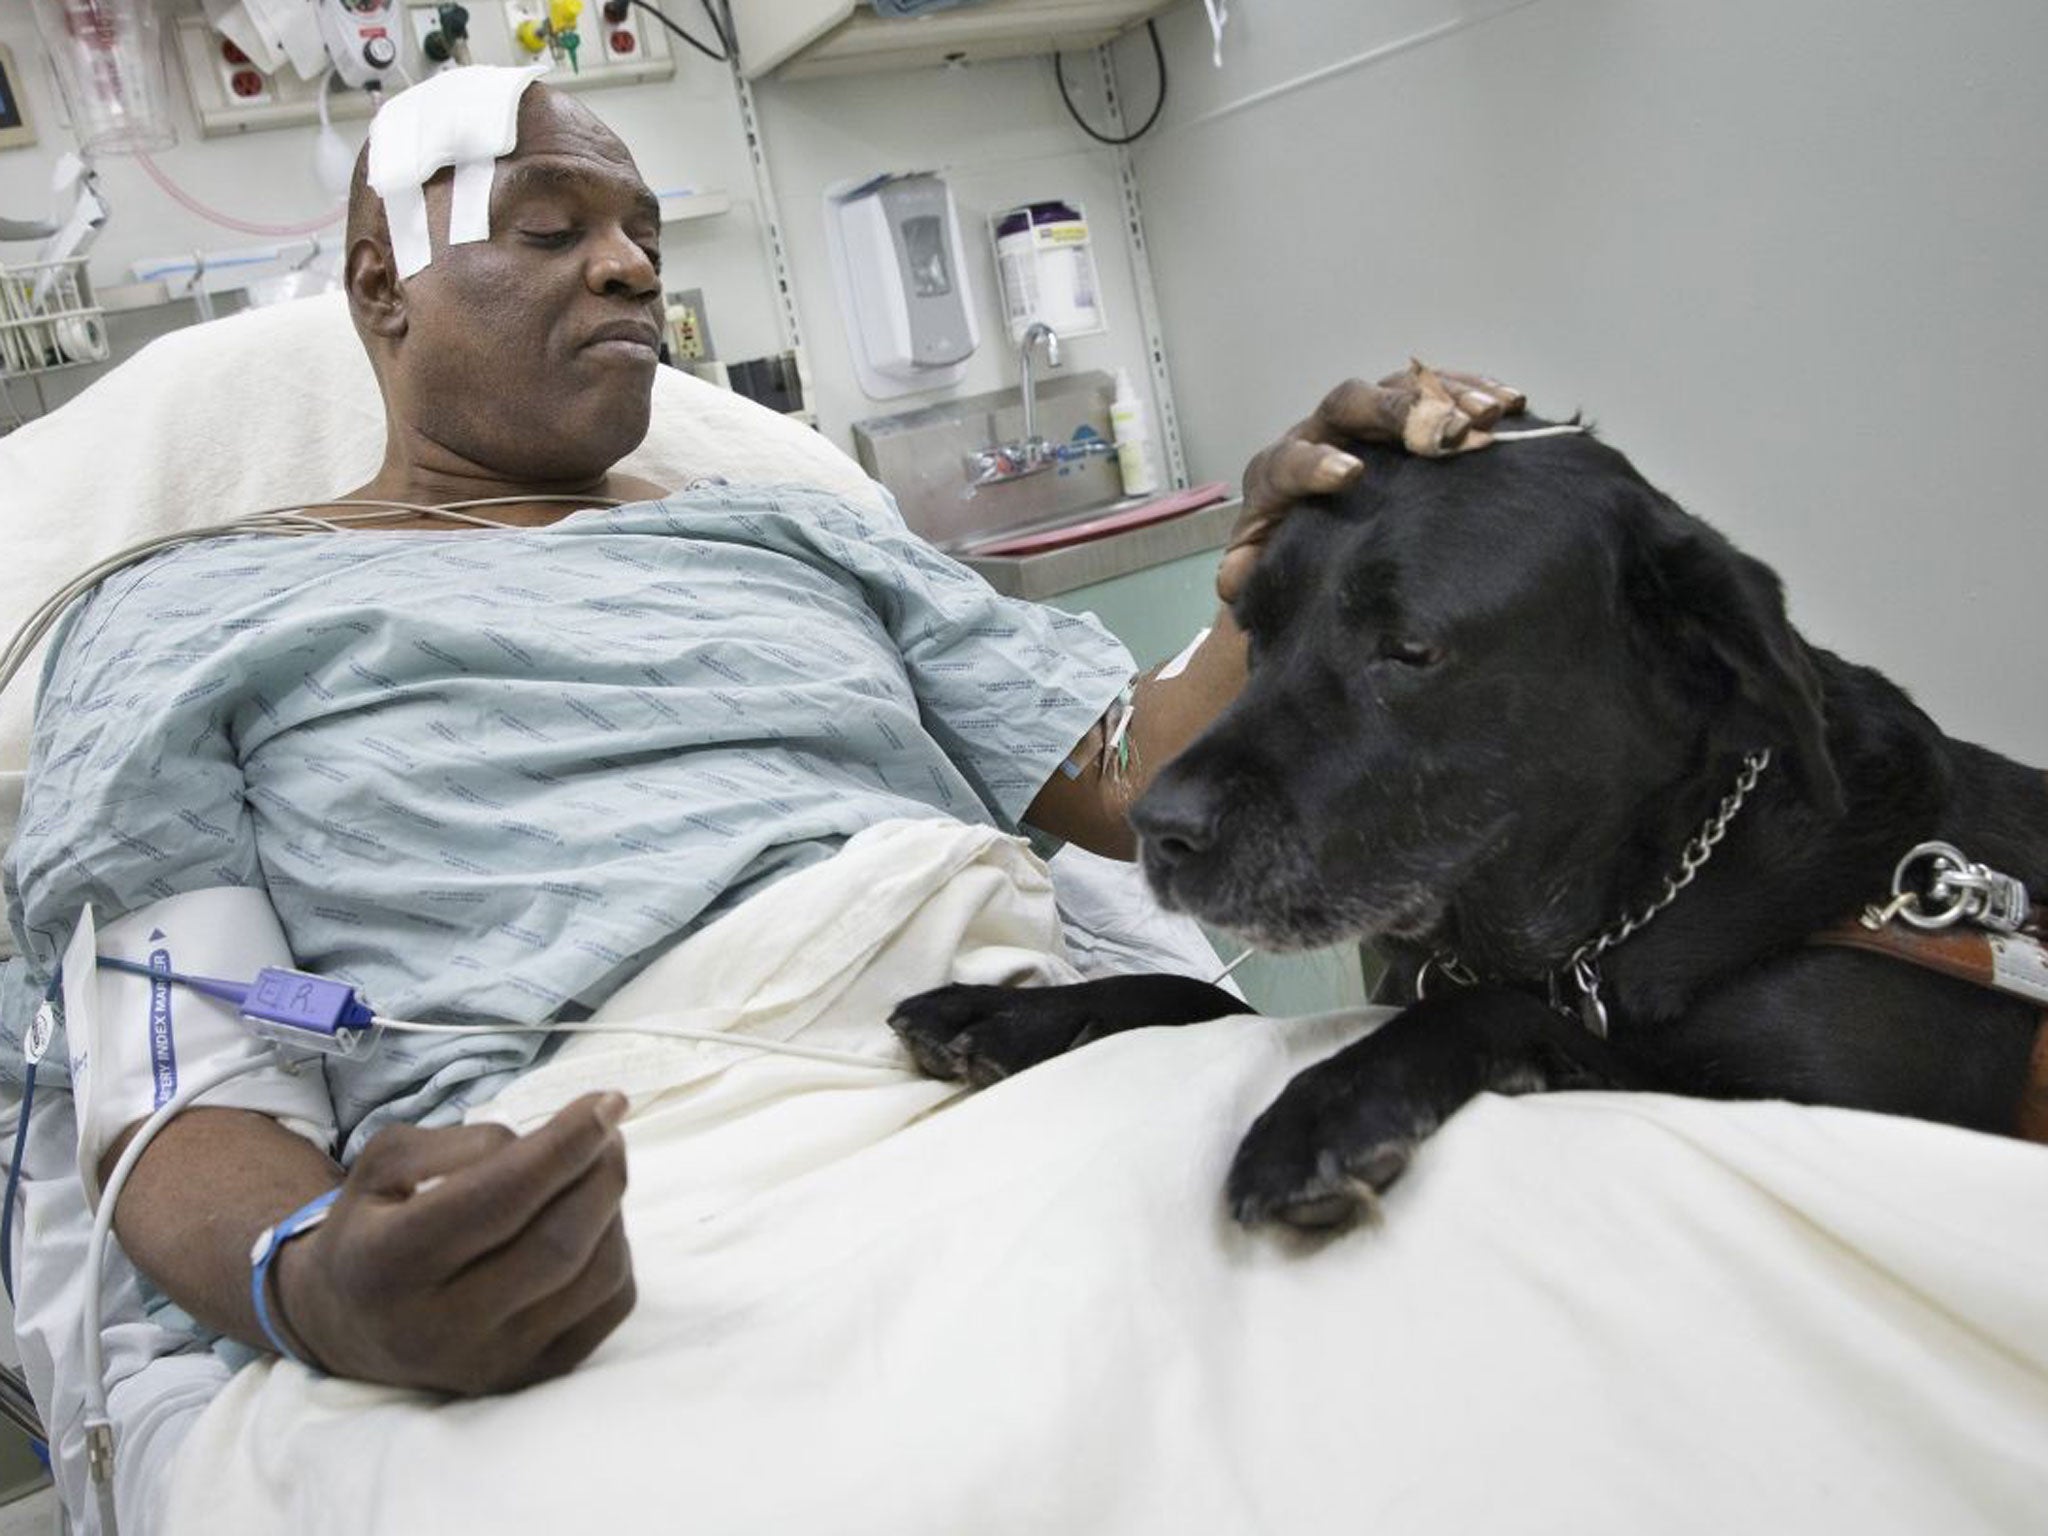 Cecil Williams pets his guide dog, Orlando, in his hospital bed following a fall onto subway tracks from the platform, Tuesday, Dec. 17, 2013, in New York. The blind 61-year-old Williams says he fainted while holding onto his black Labrador who tried to save him from falling. Both escaped without serious injury.